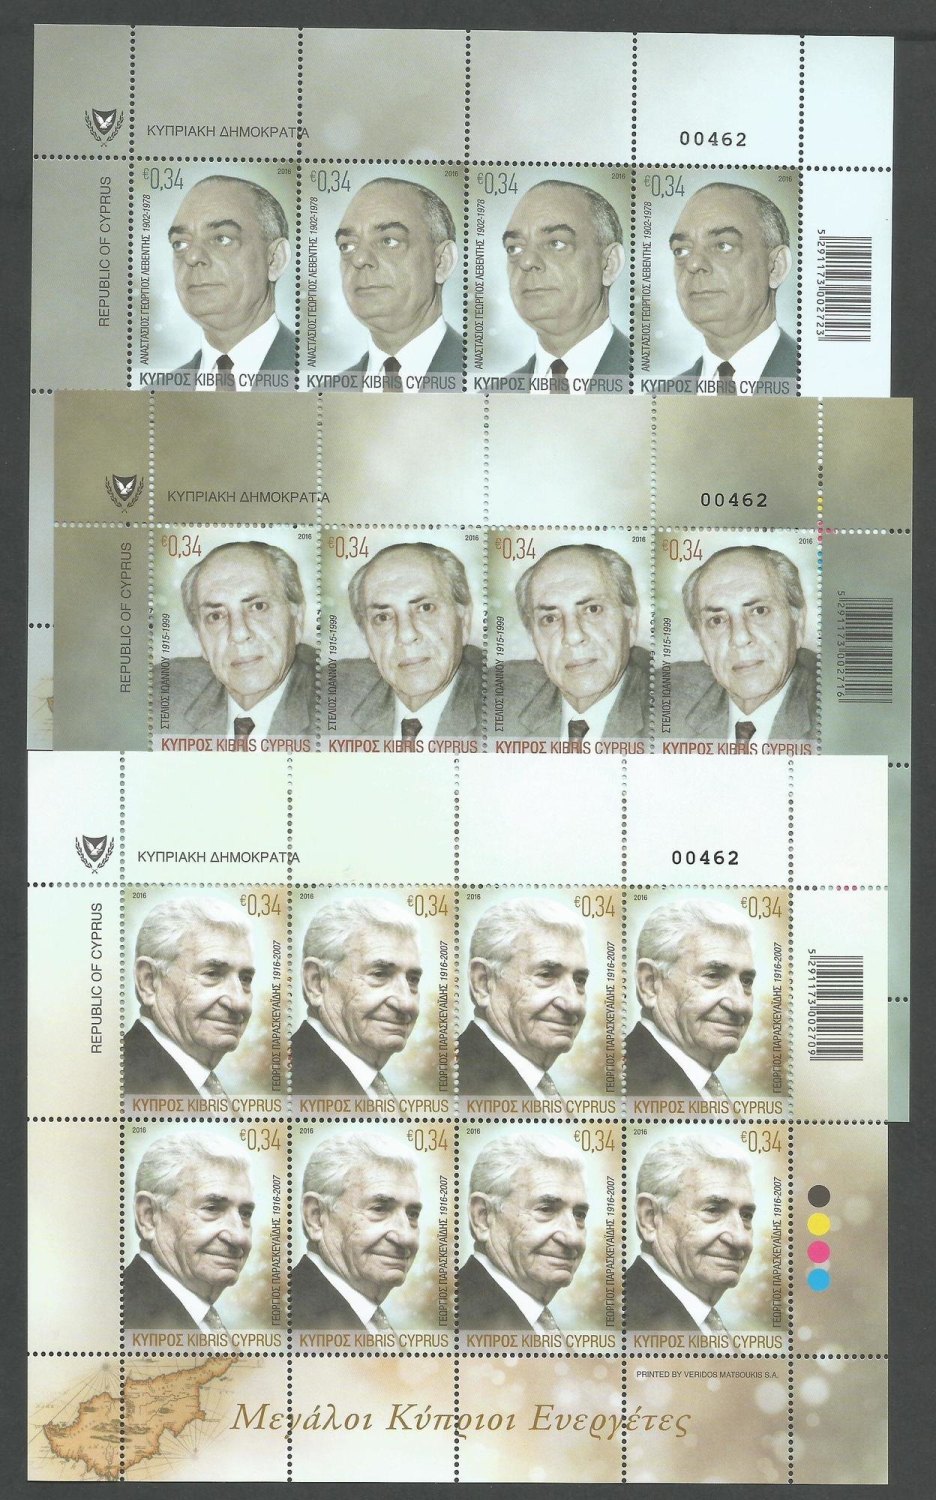 Cyprus Stamps SG 2016 (g) Great Cypriot Benefactors - Full sheet MINT